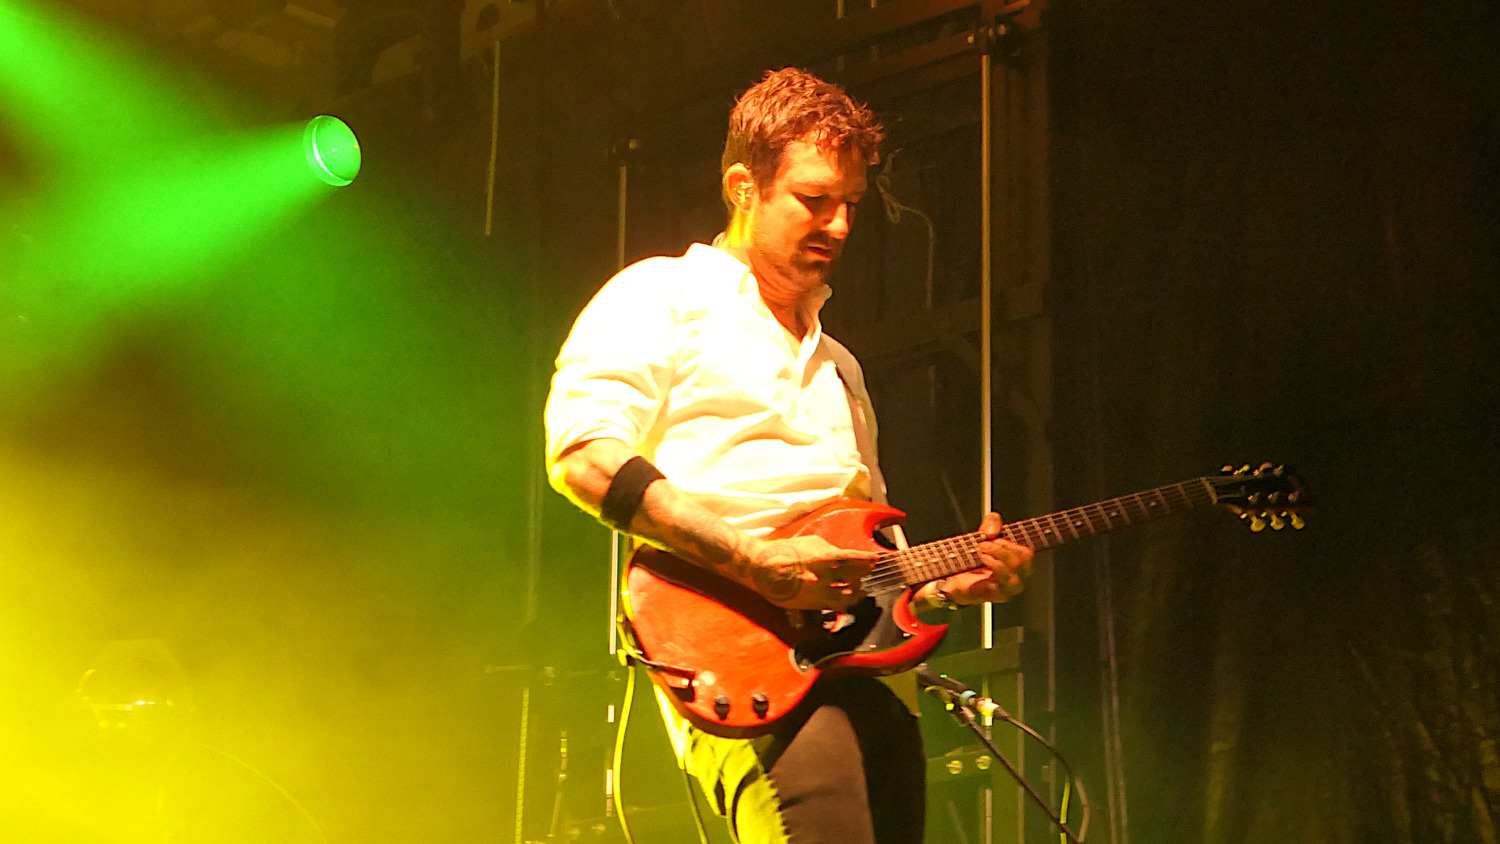 Frank Turner playing a red/brown electric guitar. Green/yellow lighting in the background